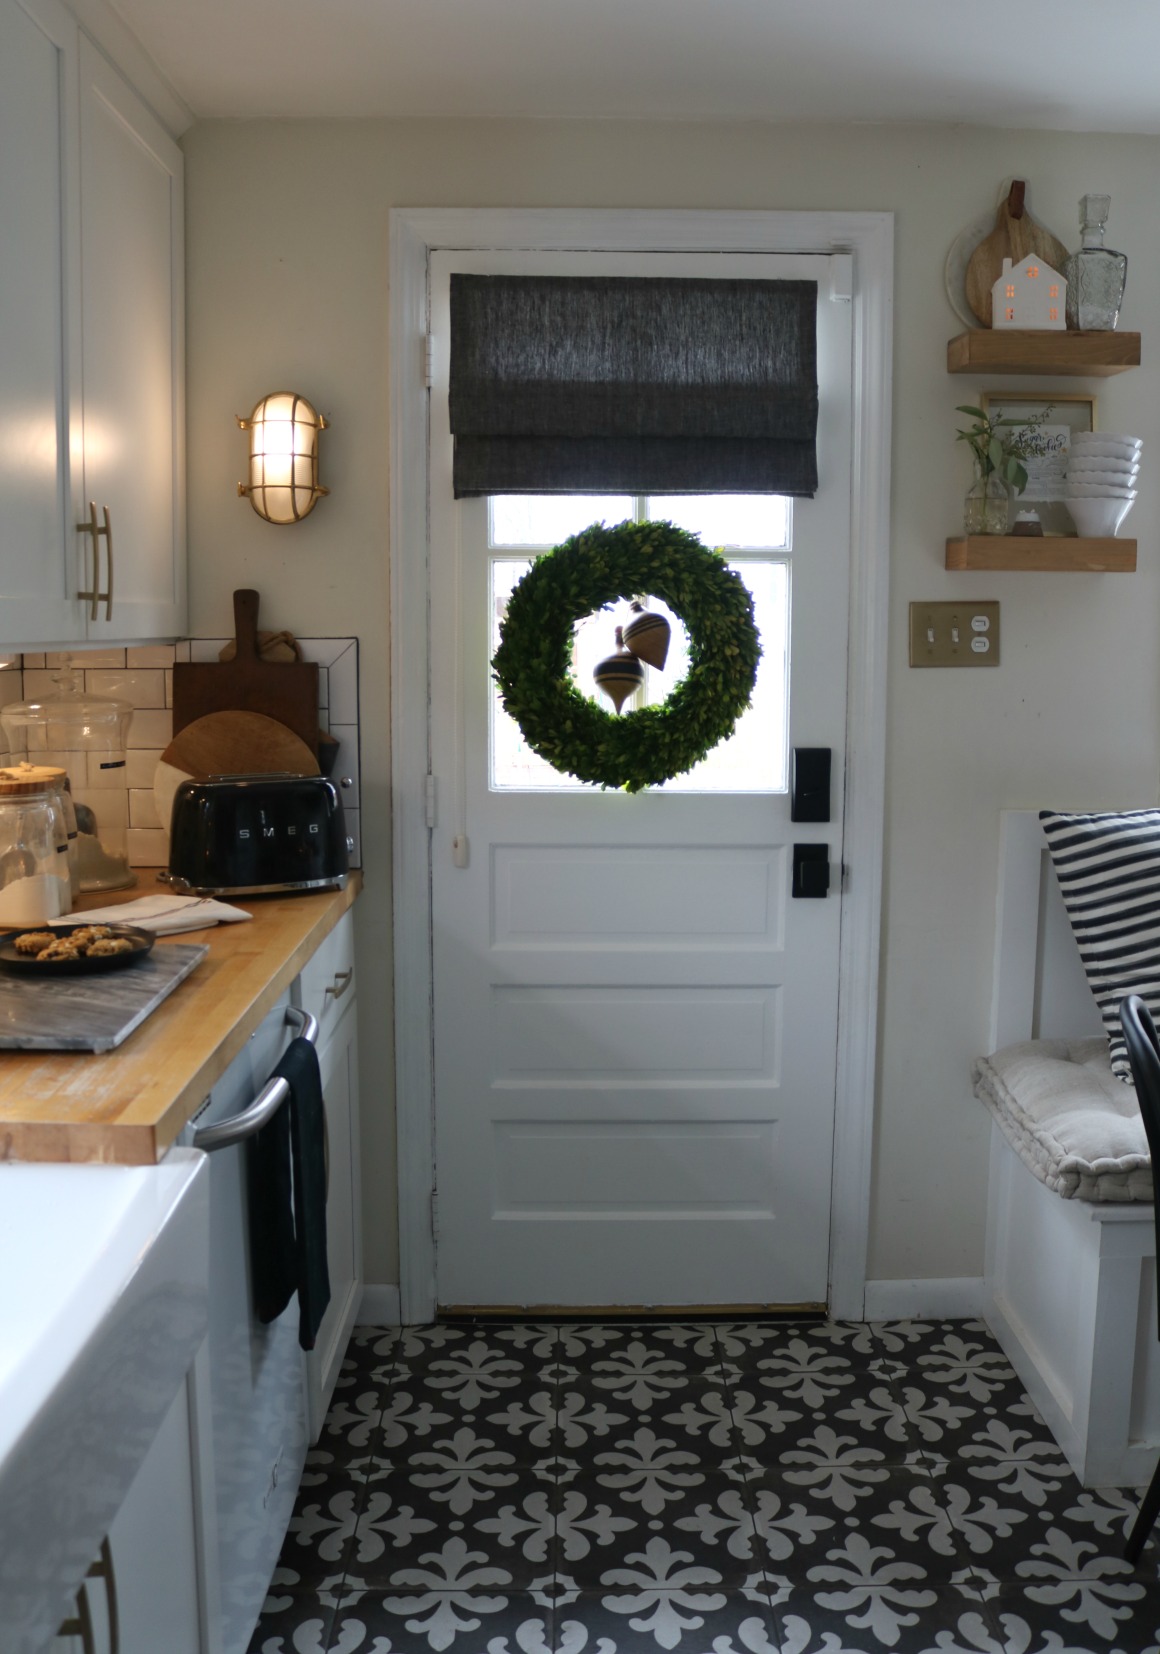 How to Create a Cozy Kitchen at Christmas 